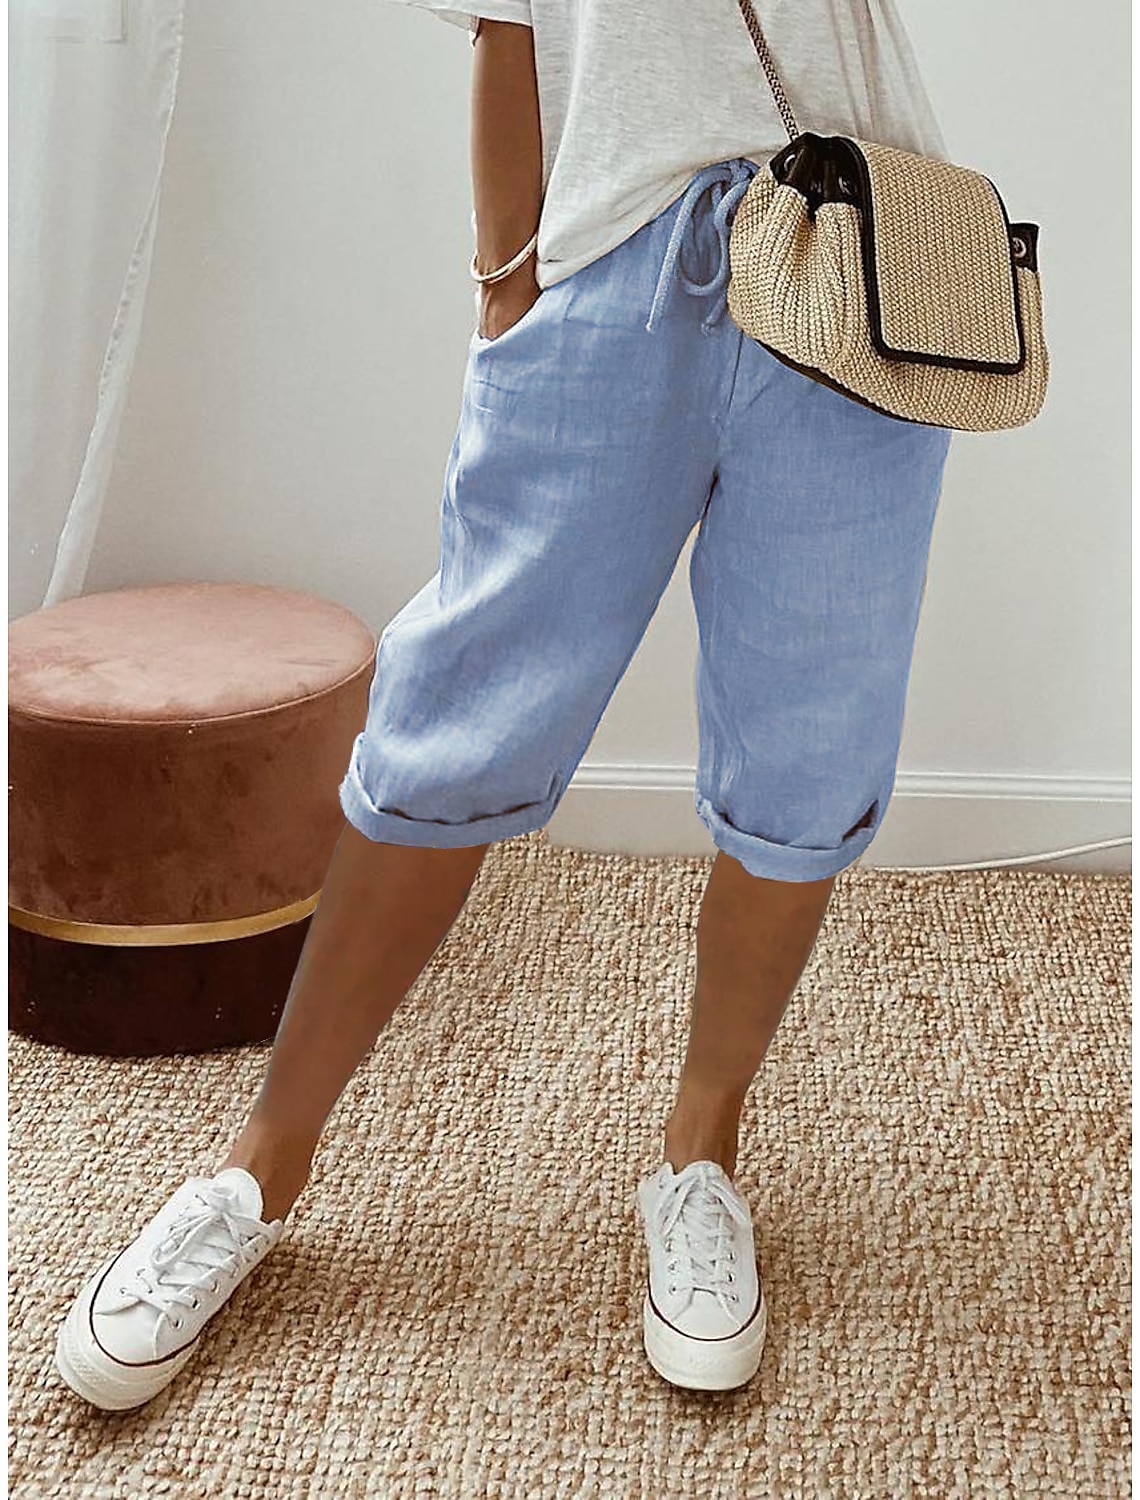 Women's Linen Pants Baggy Knee Length Pocket Baggy Vacation Casual Daily Casual Daily Wear Robin's Egg Blue White / White S M Autumn / Fall Spring & Summer 2023 - US $16.99 –P3